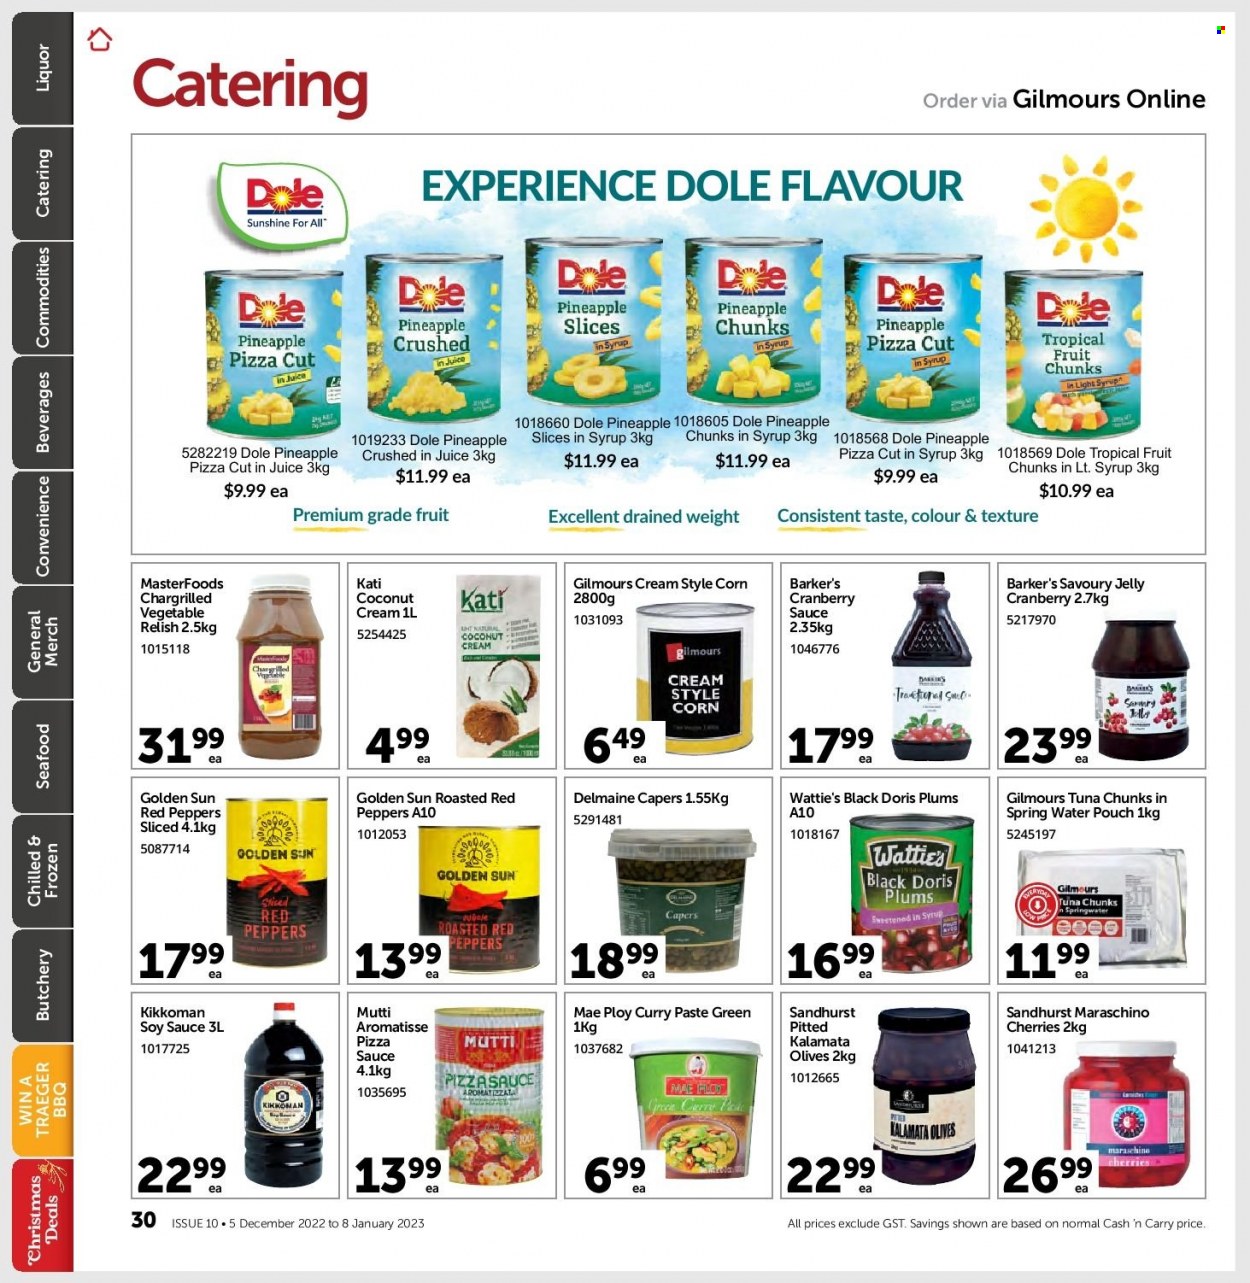 thumbnail - Gilmours mailer - 05.12.2022 - 08.01.2023 - Sales products - Dole, peppers, red peppers, pineapple, plums, coconut, tuna, seafood, sauce, Wattie's, Delmaine, Sunshine, jelly, capers, olives, Maraschino cherries, curry paste, soy sauce, Kikkoman, cranberry sauce, juice, spring water. Page 29.